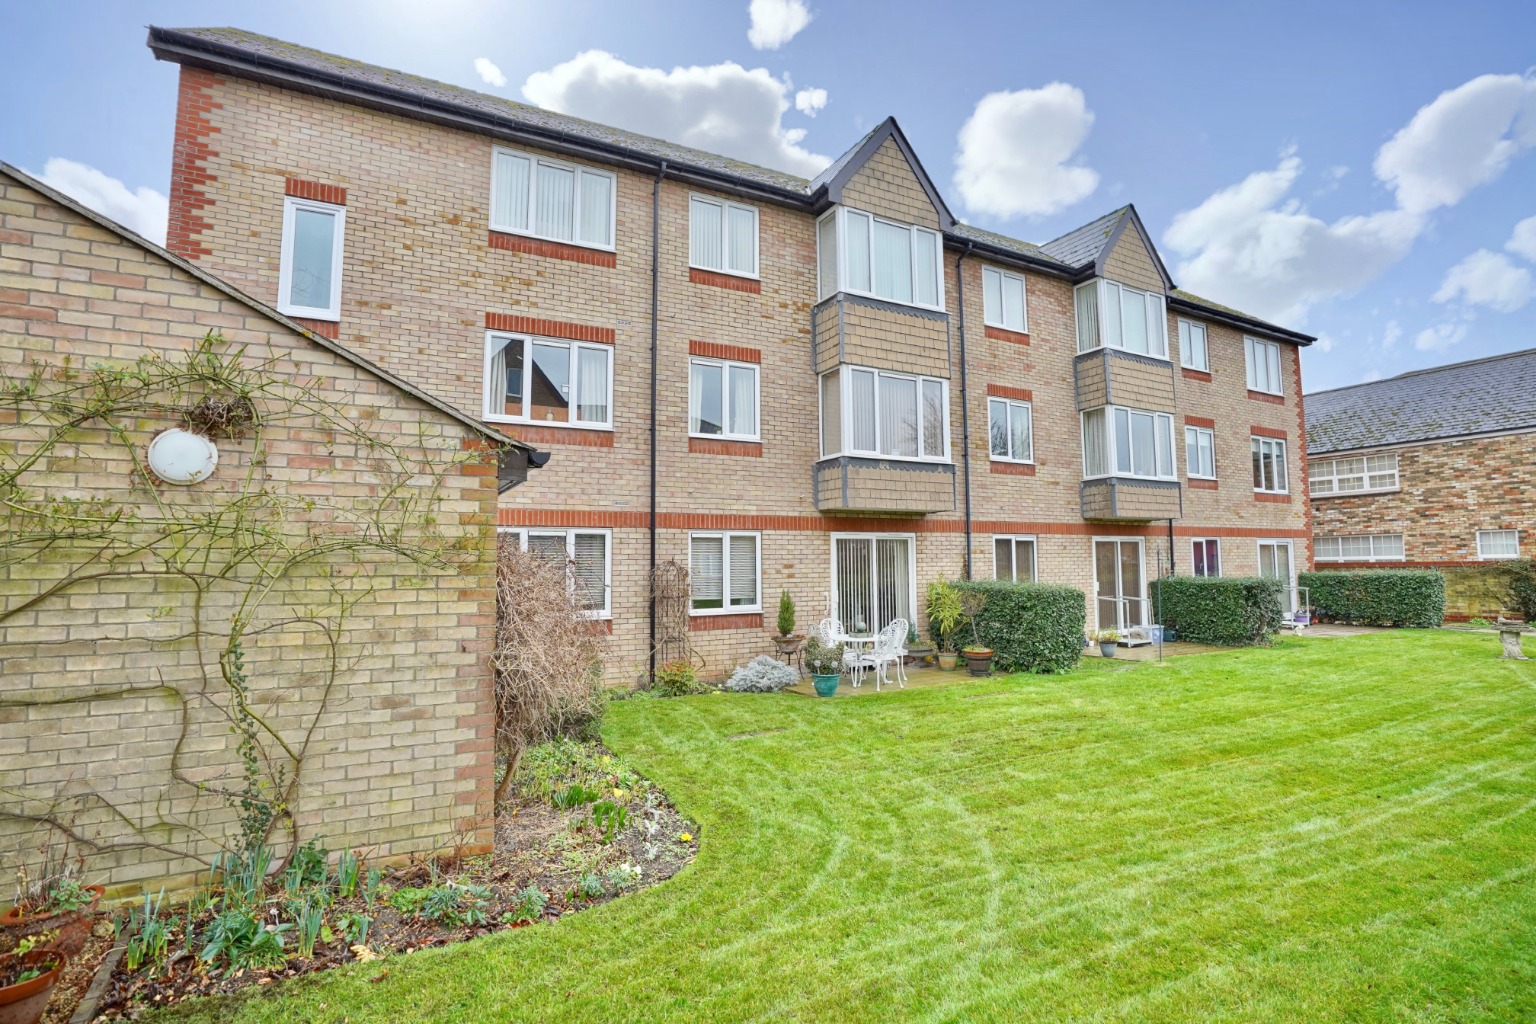 2 bed for sale in Old Market Court, St. Neots - Property Image 1